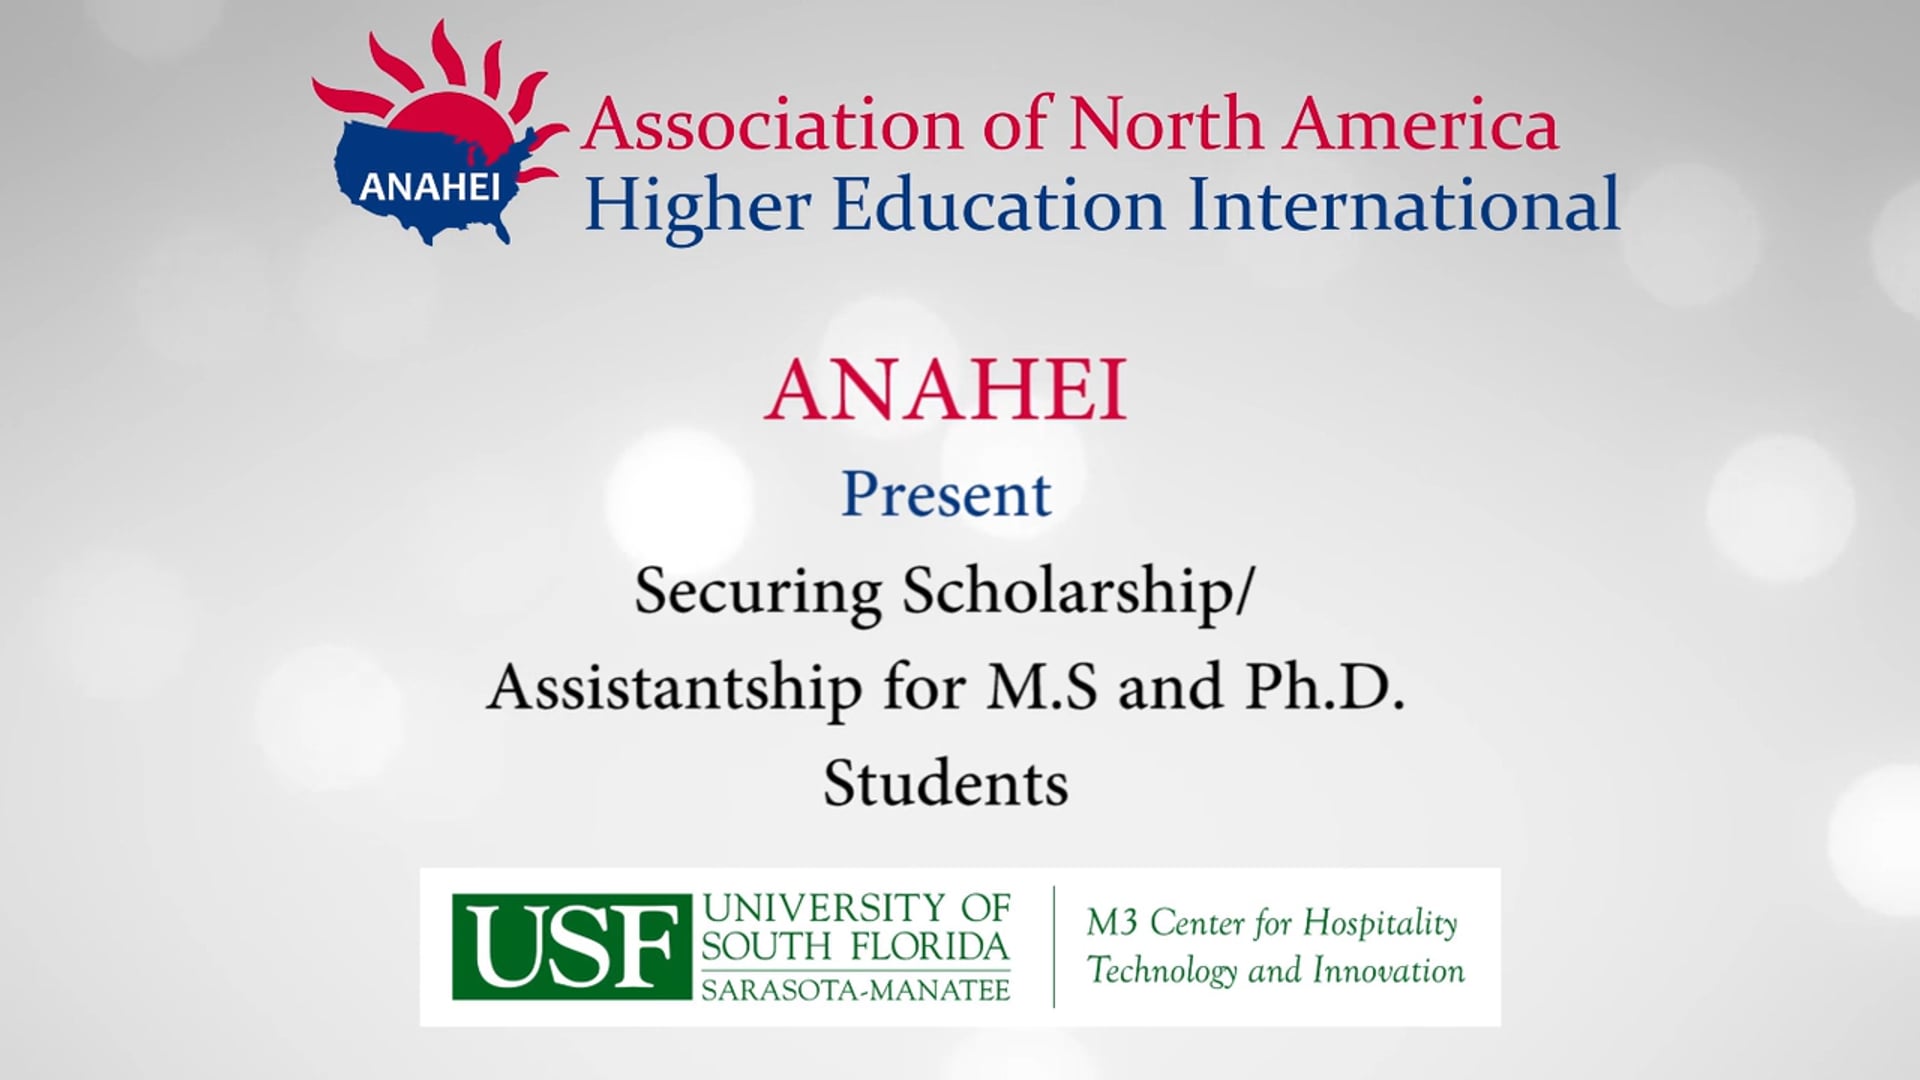 Securing Scholarship/Assistantship for M.S. and Ph.D. Students